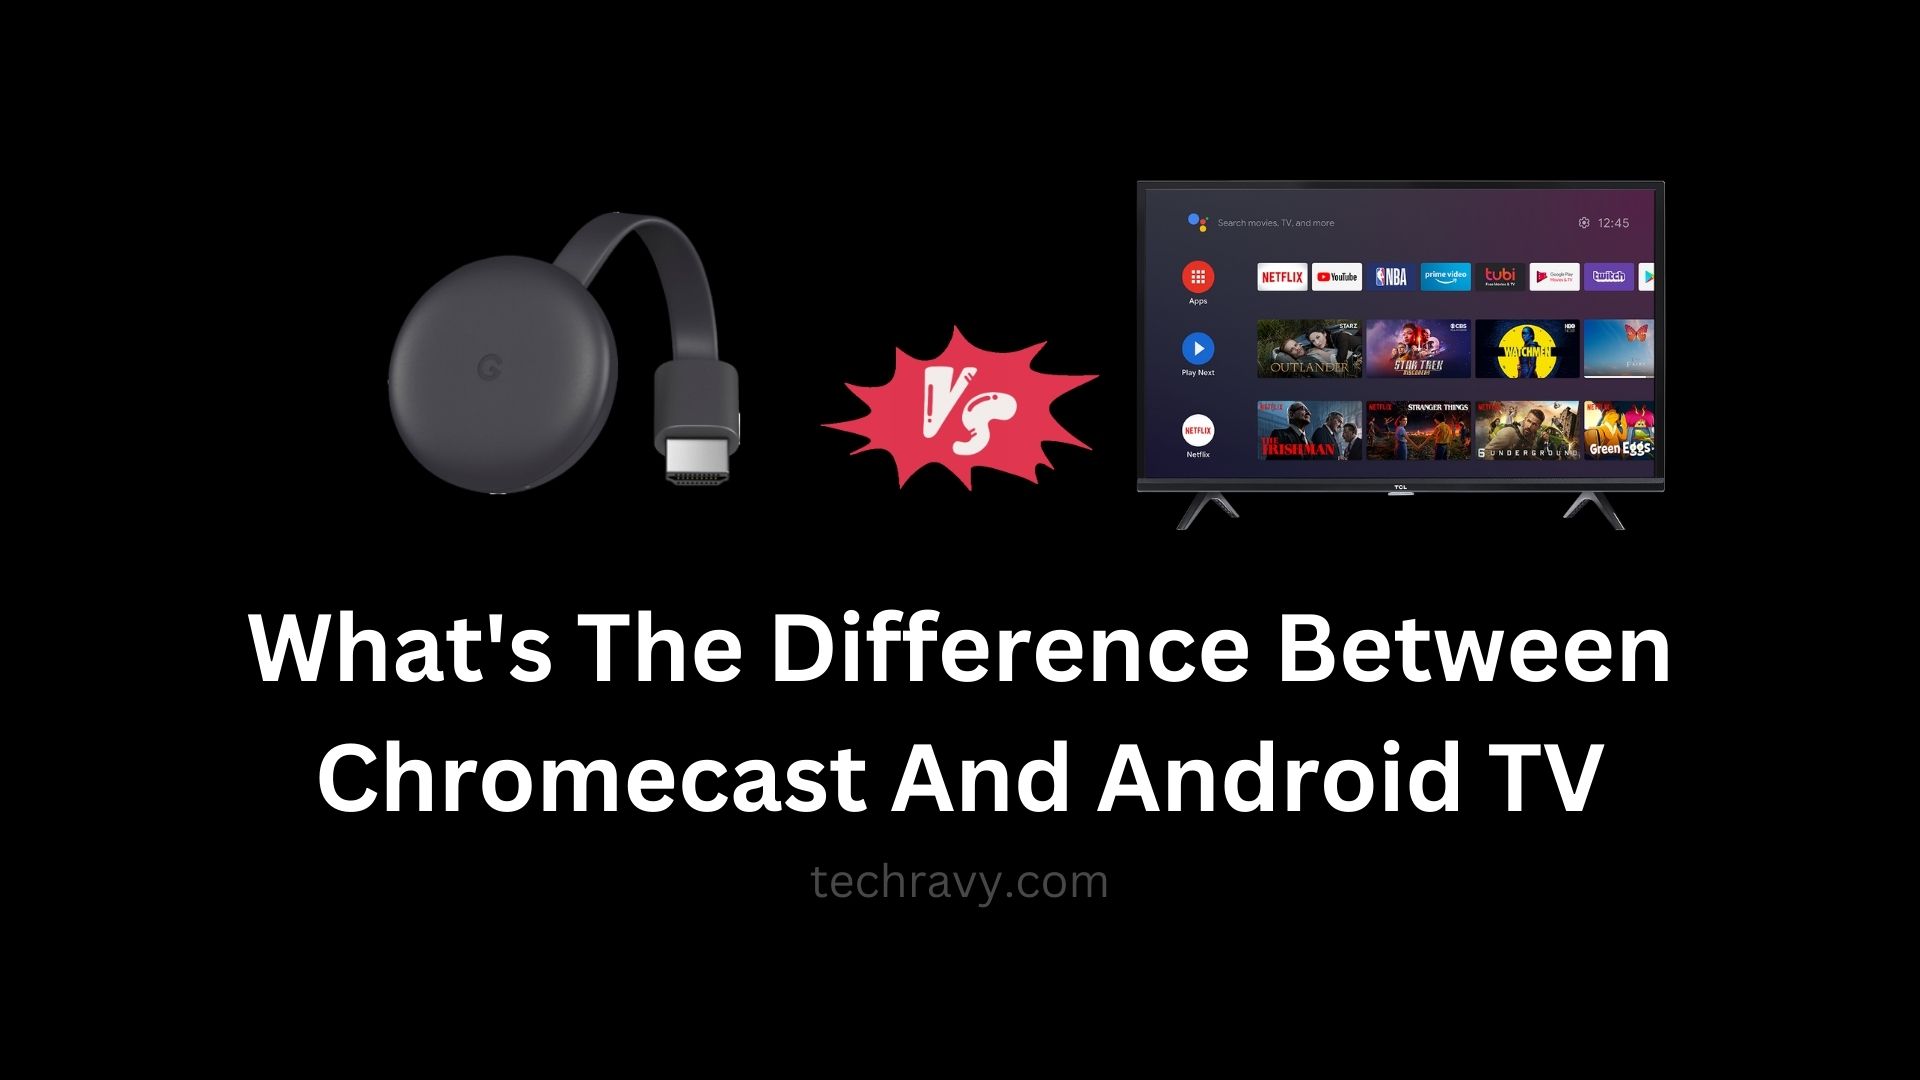 What's The Difference Between Chromecast And Android TV